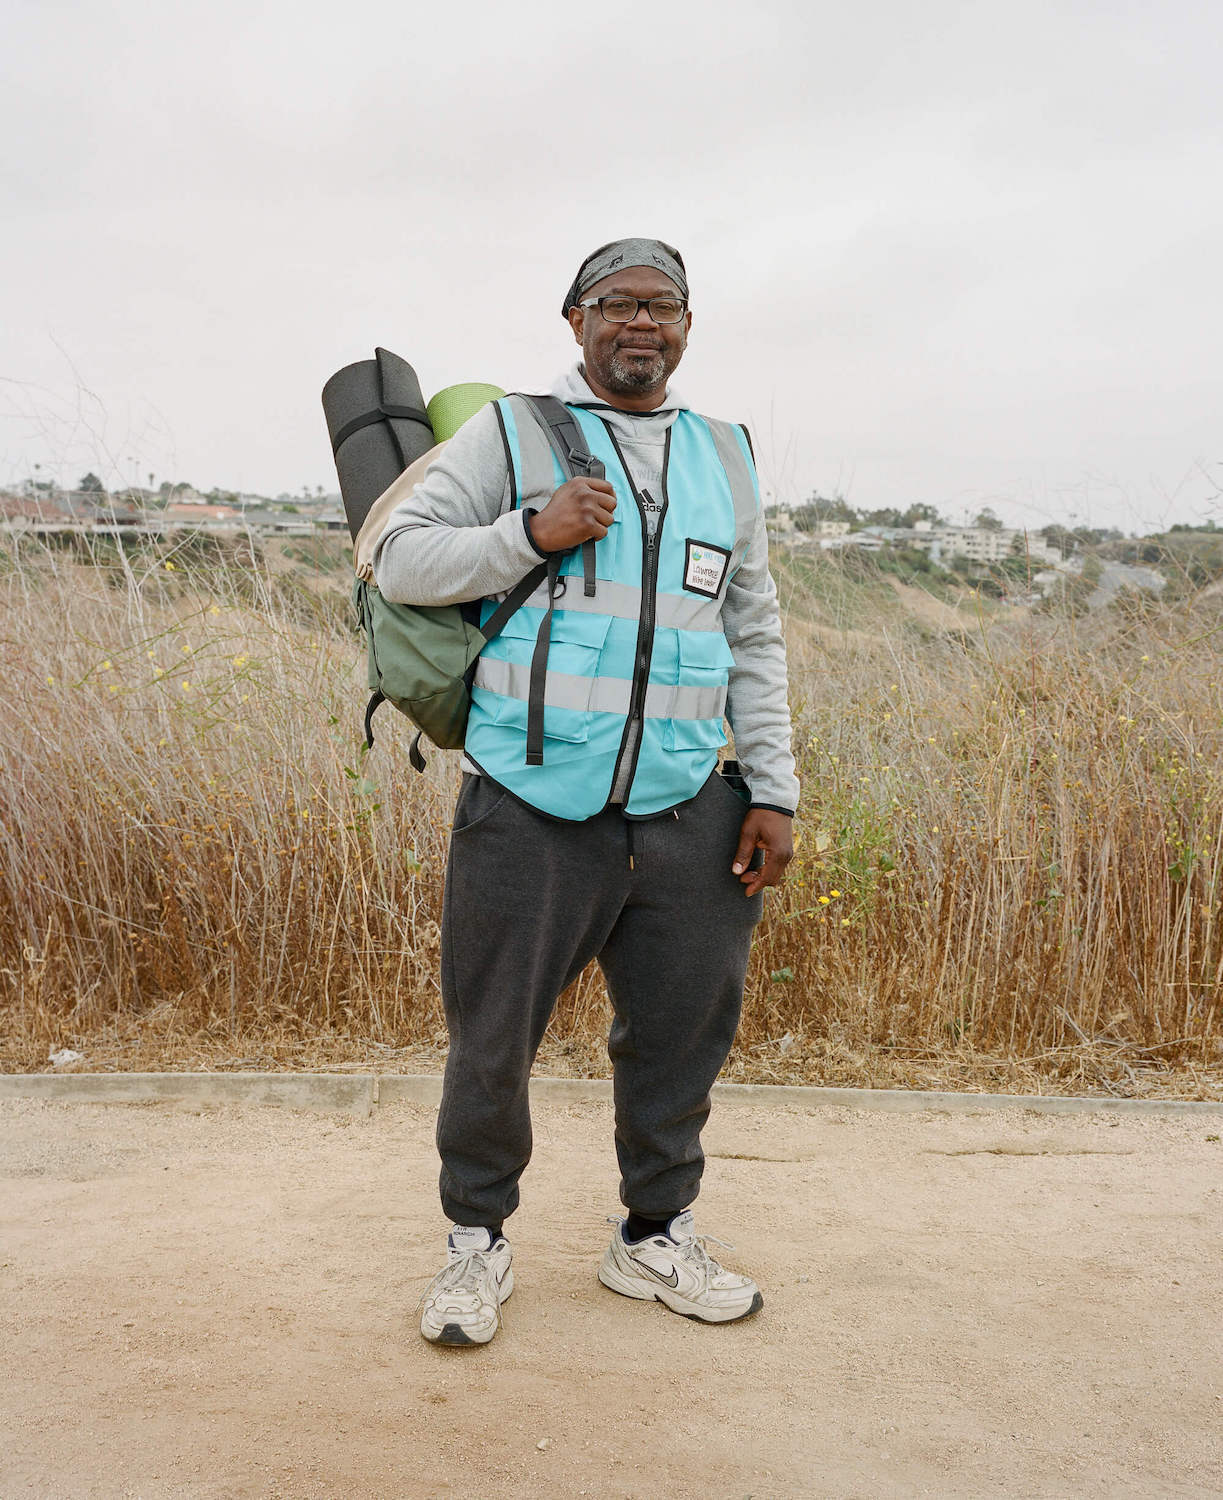 Lawrence Dotson in Kenneth Hahn State Recreation Area